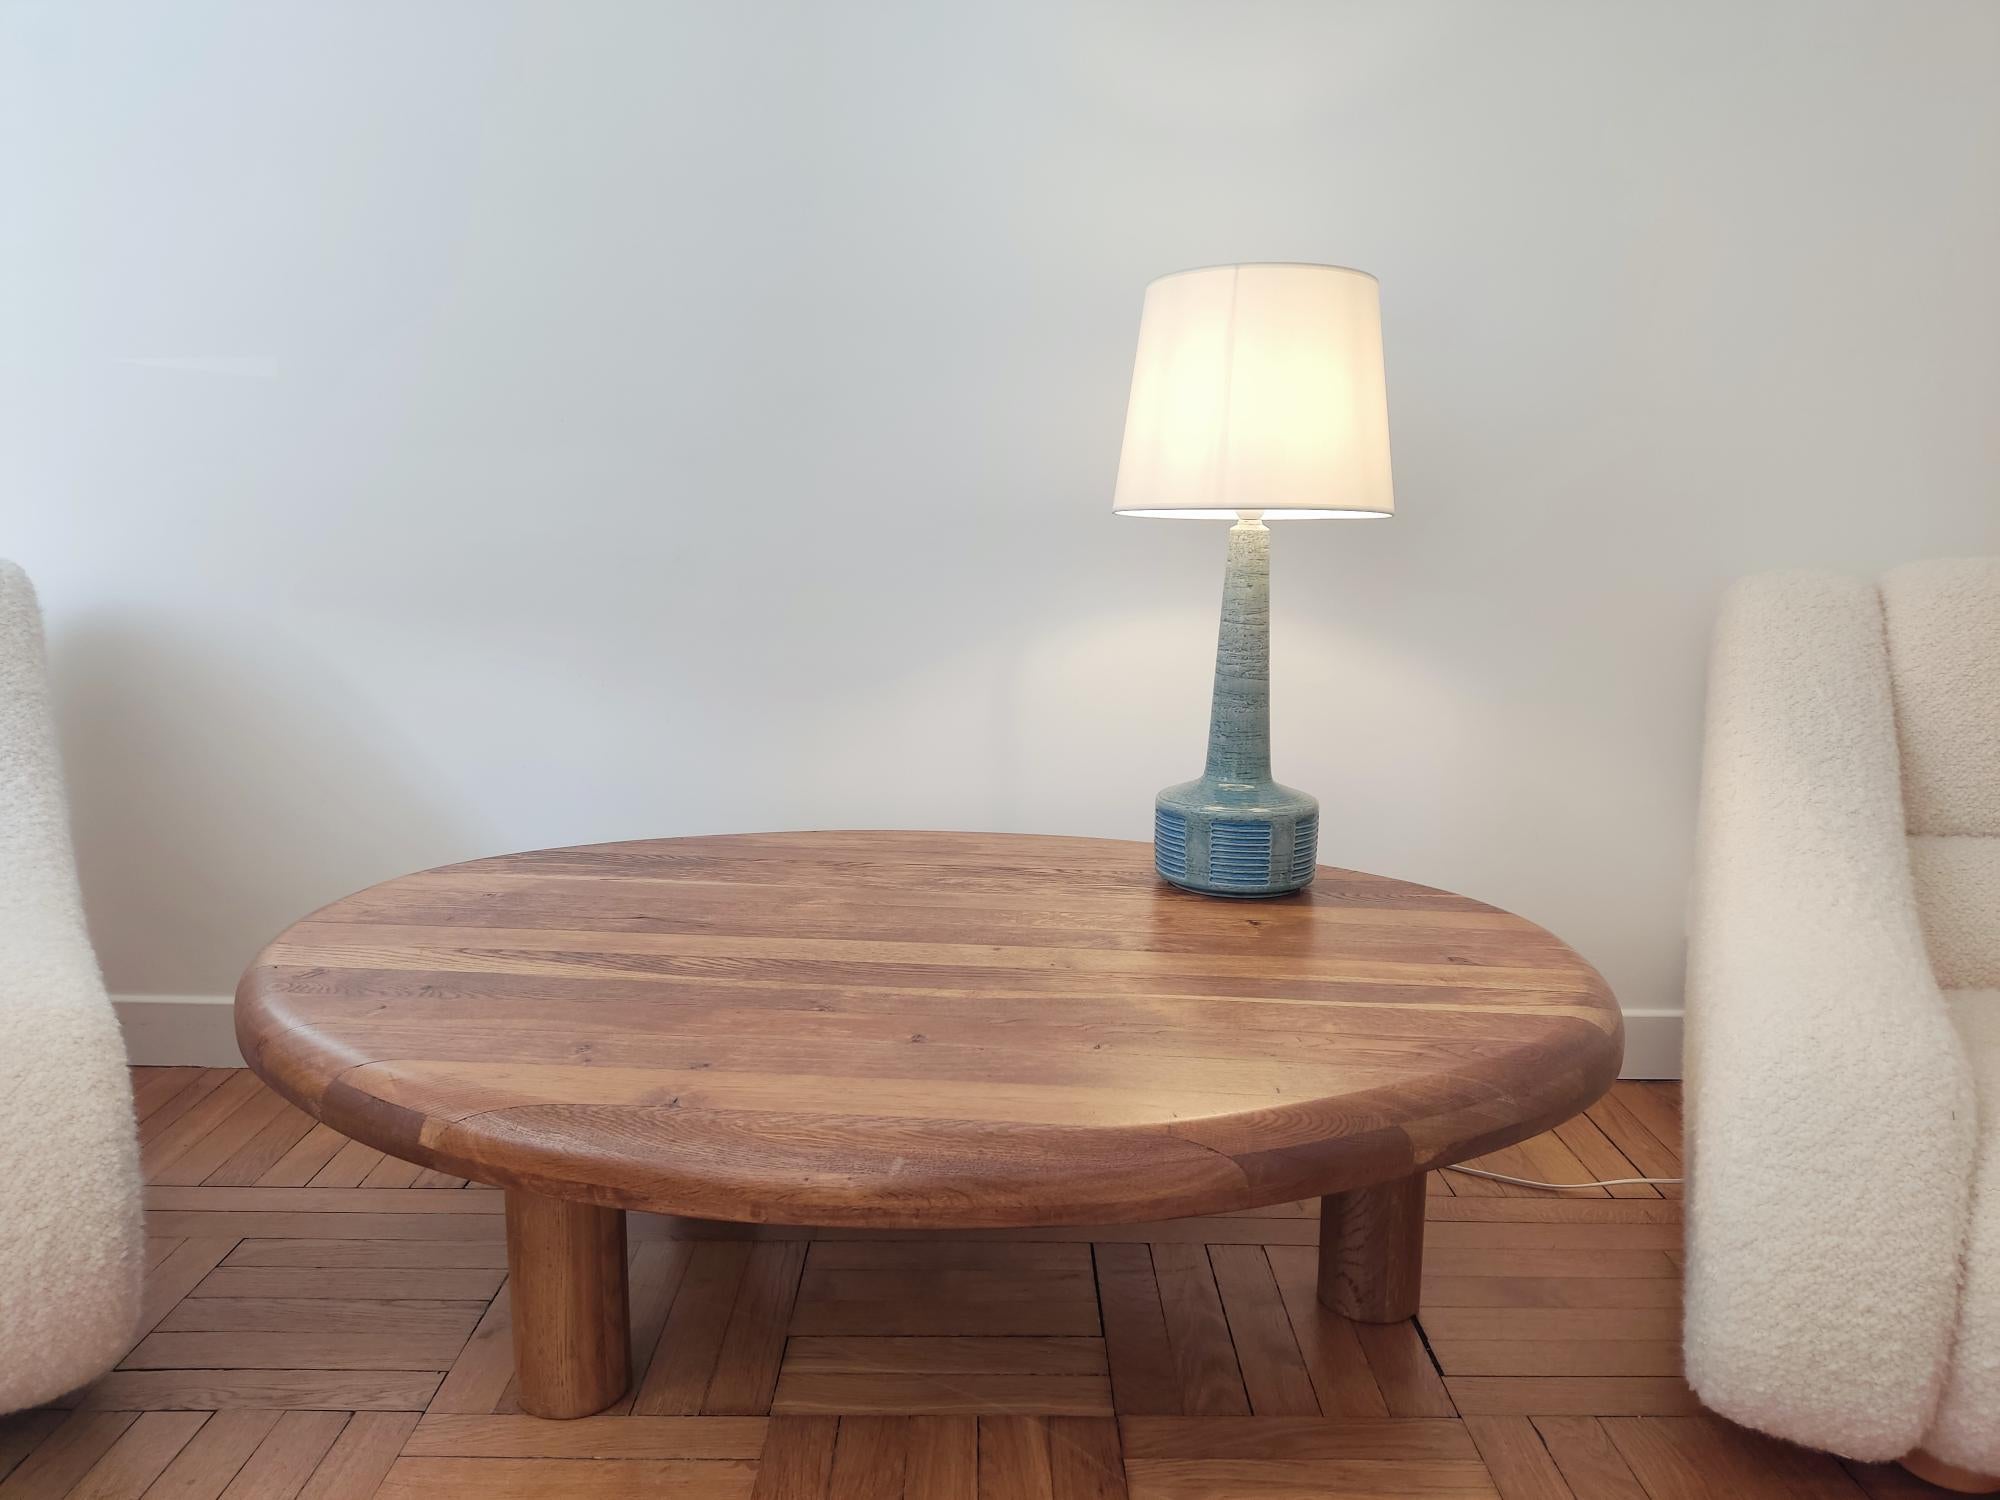 Spanish Vval solid wood coffee table